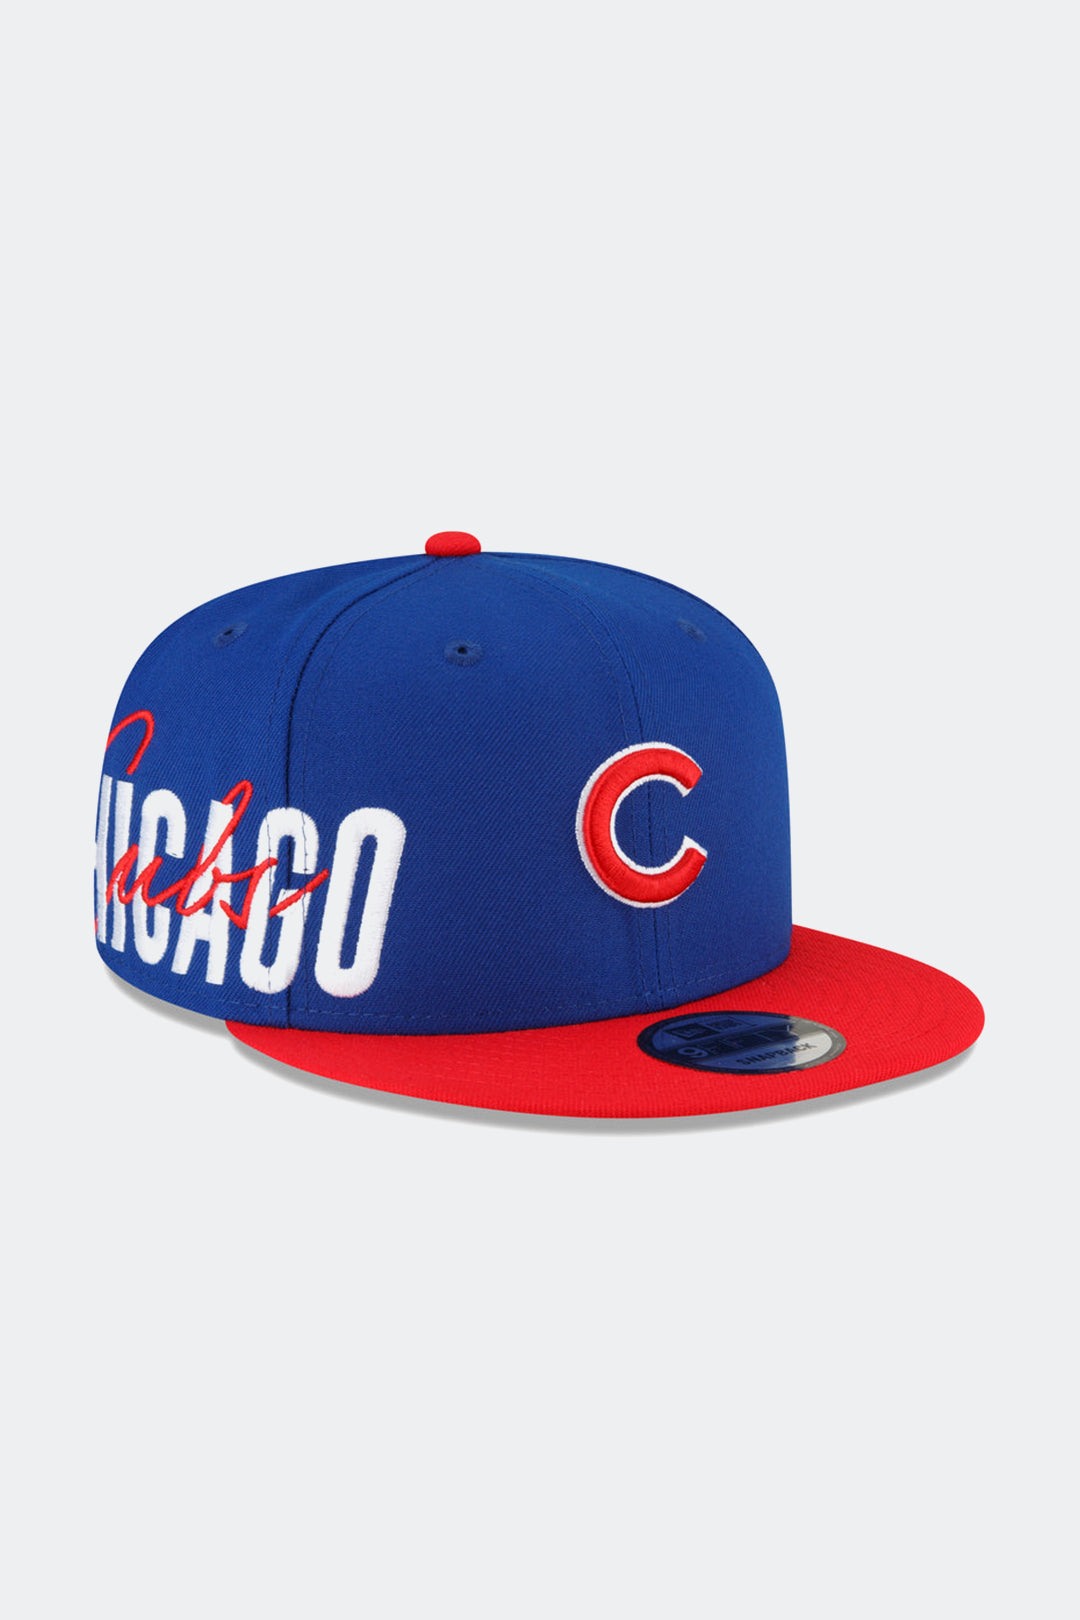 NEW ERA 9FIFTY CHICAGO CUBS "SIDE FONT" - HYPE